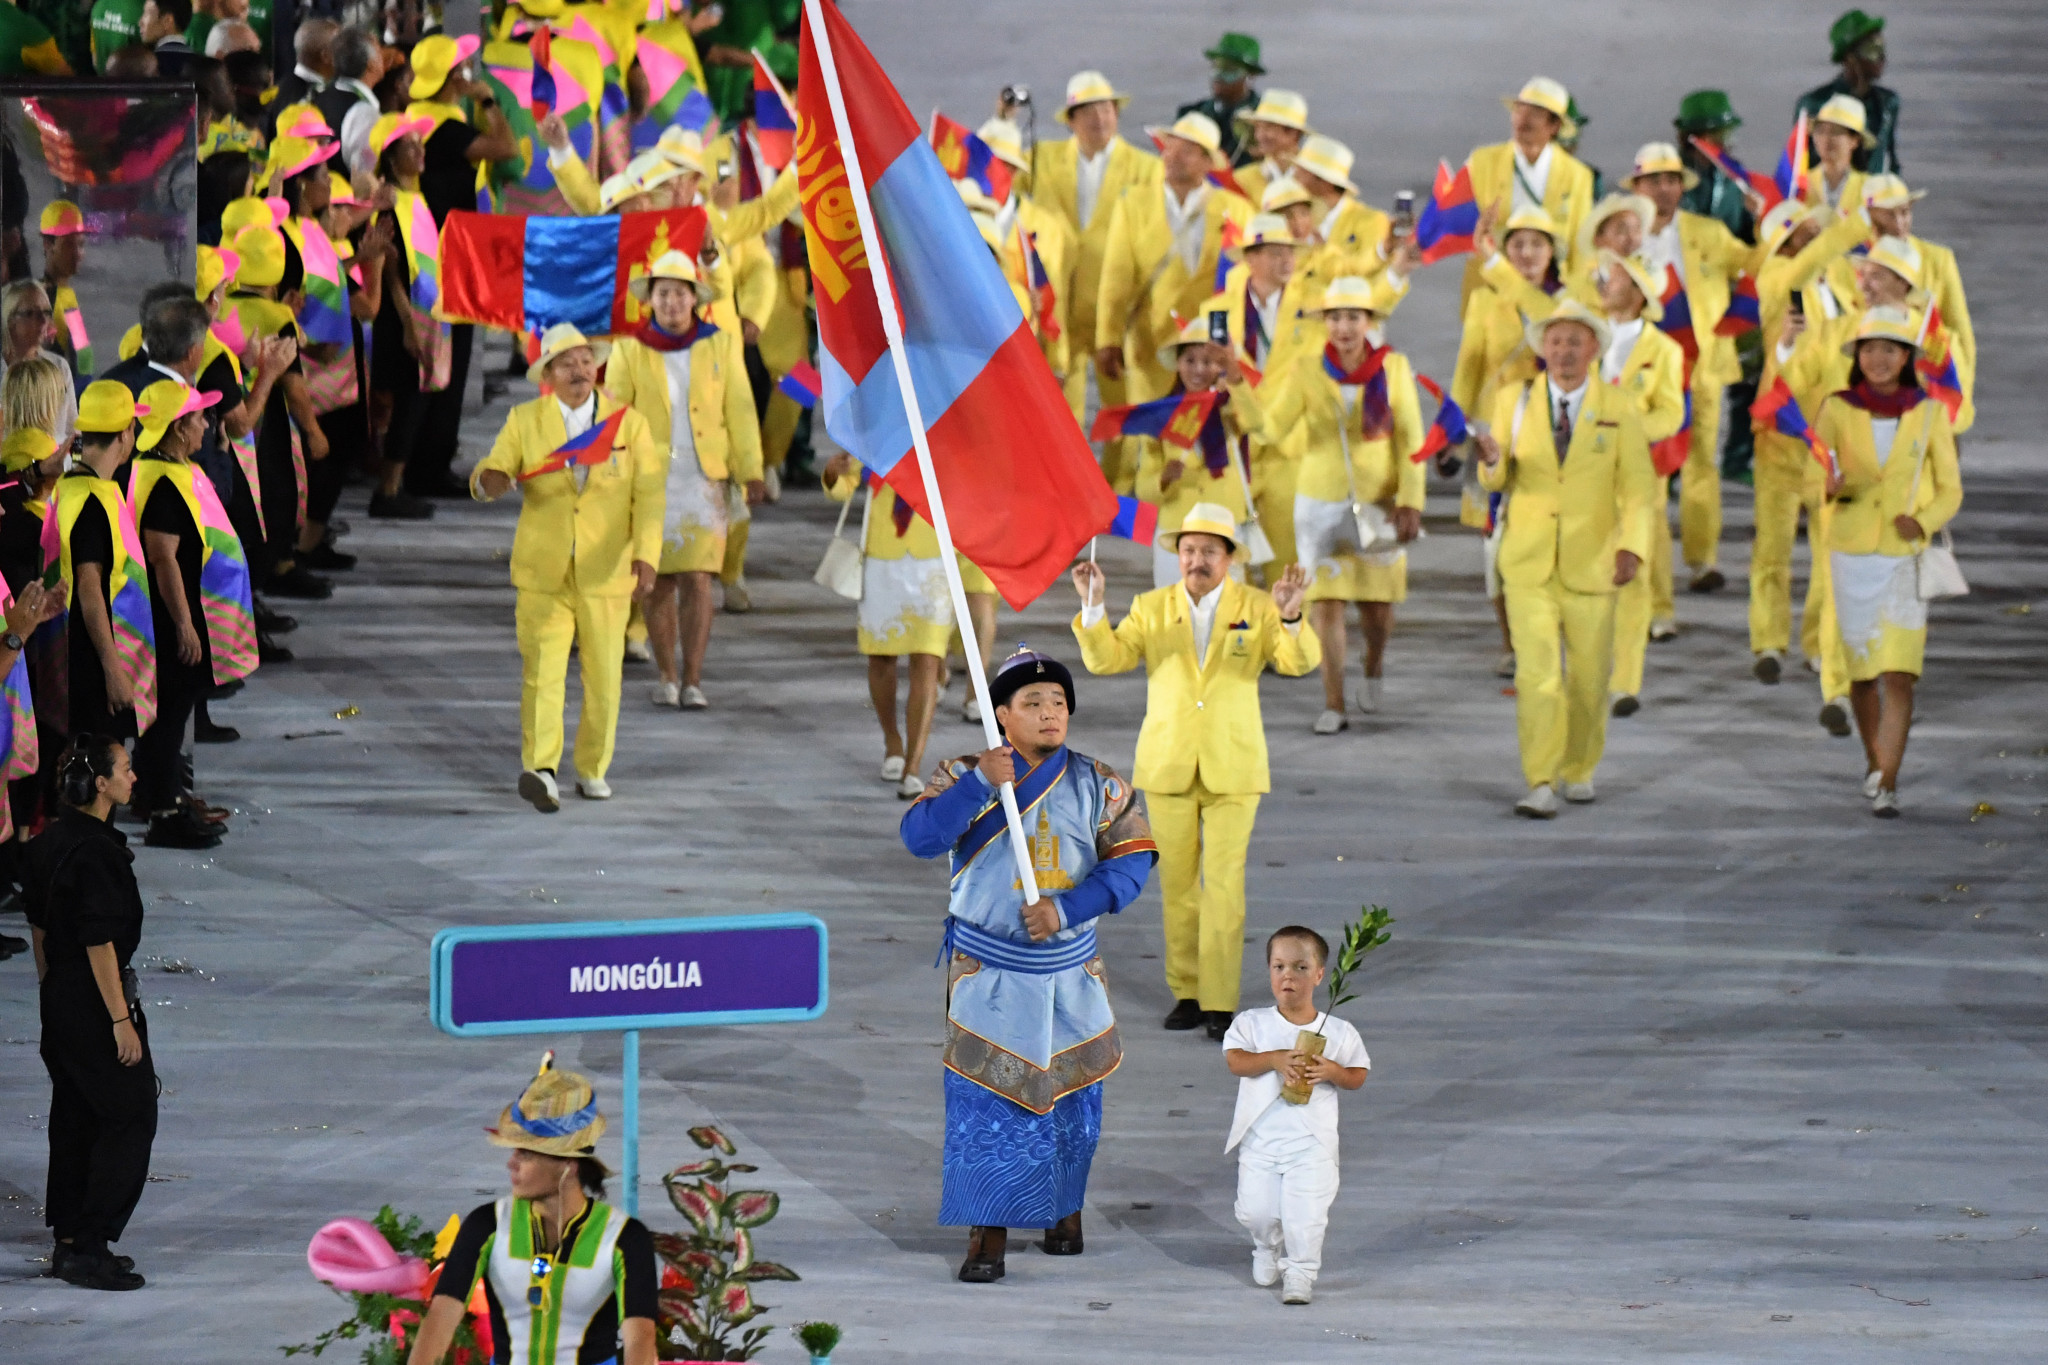 Mongolia has awarded 17 scholarships for Tokyo 2020 ©Getty Images